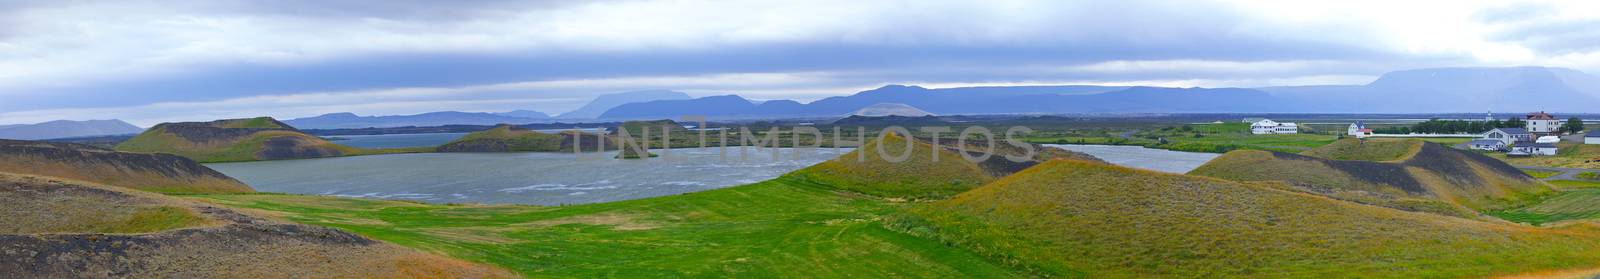 Iceland landscape at summer cloudy day. Mountain lake Myvatn. Panorama